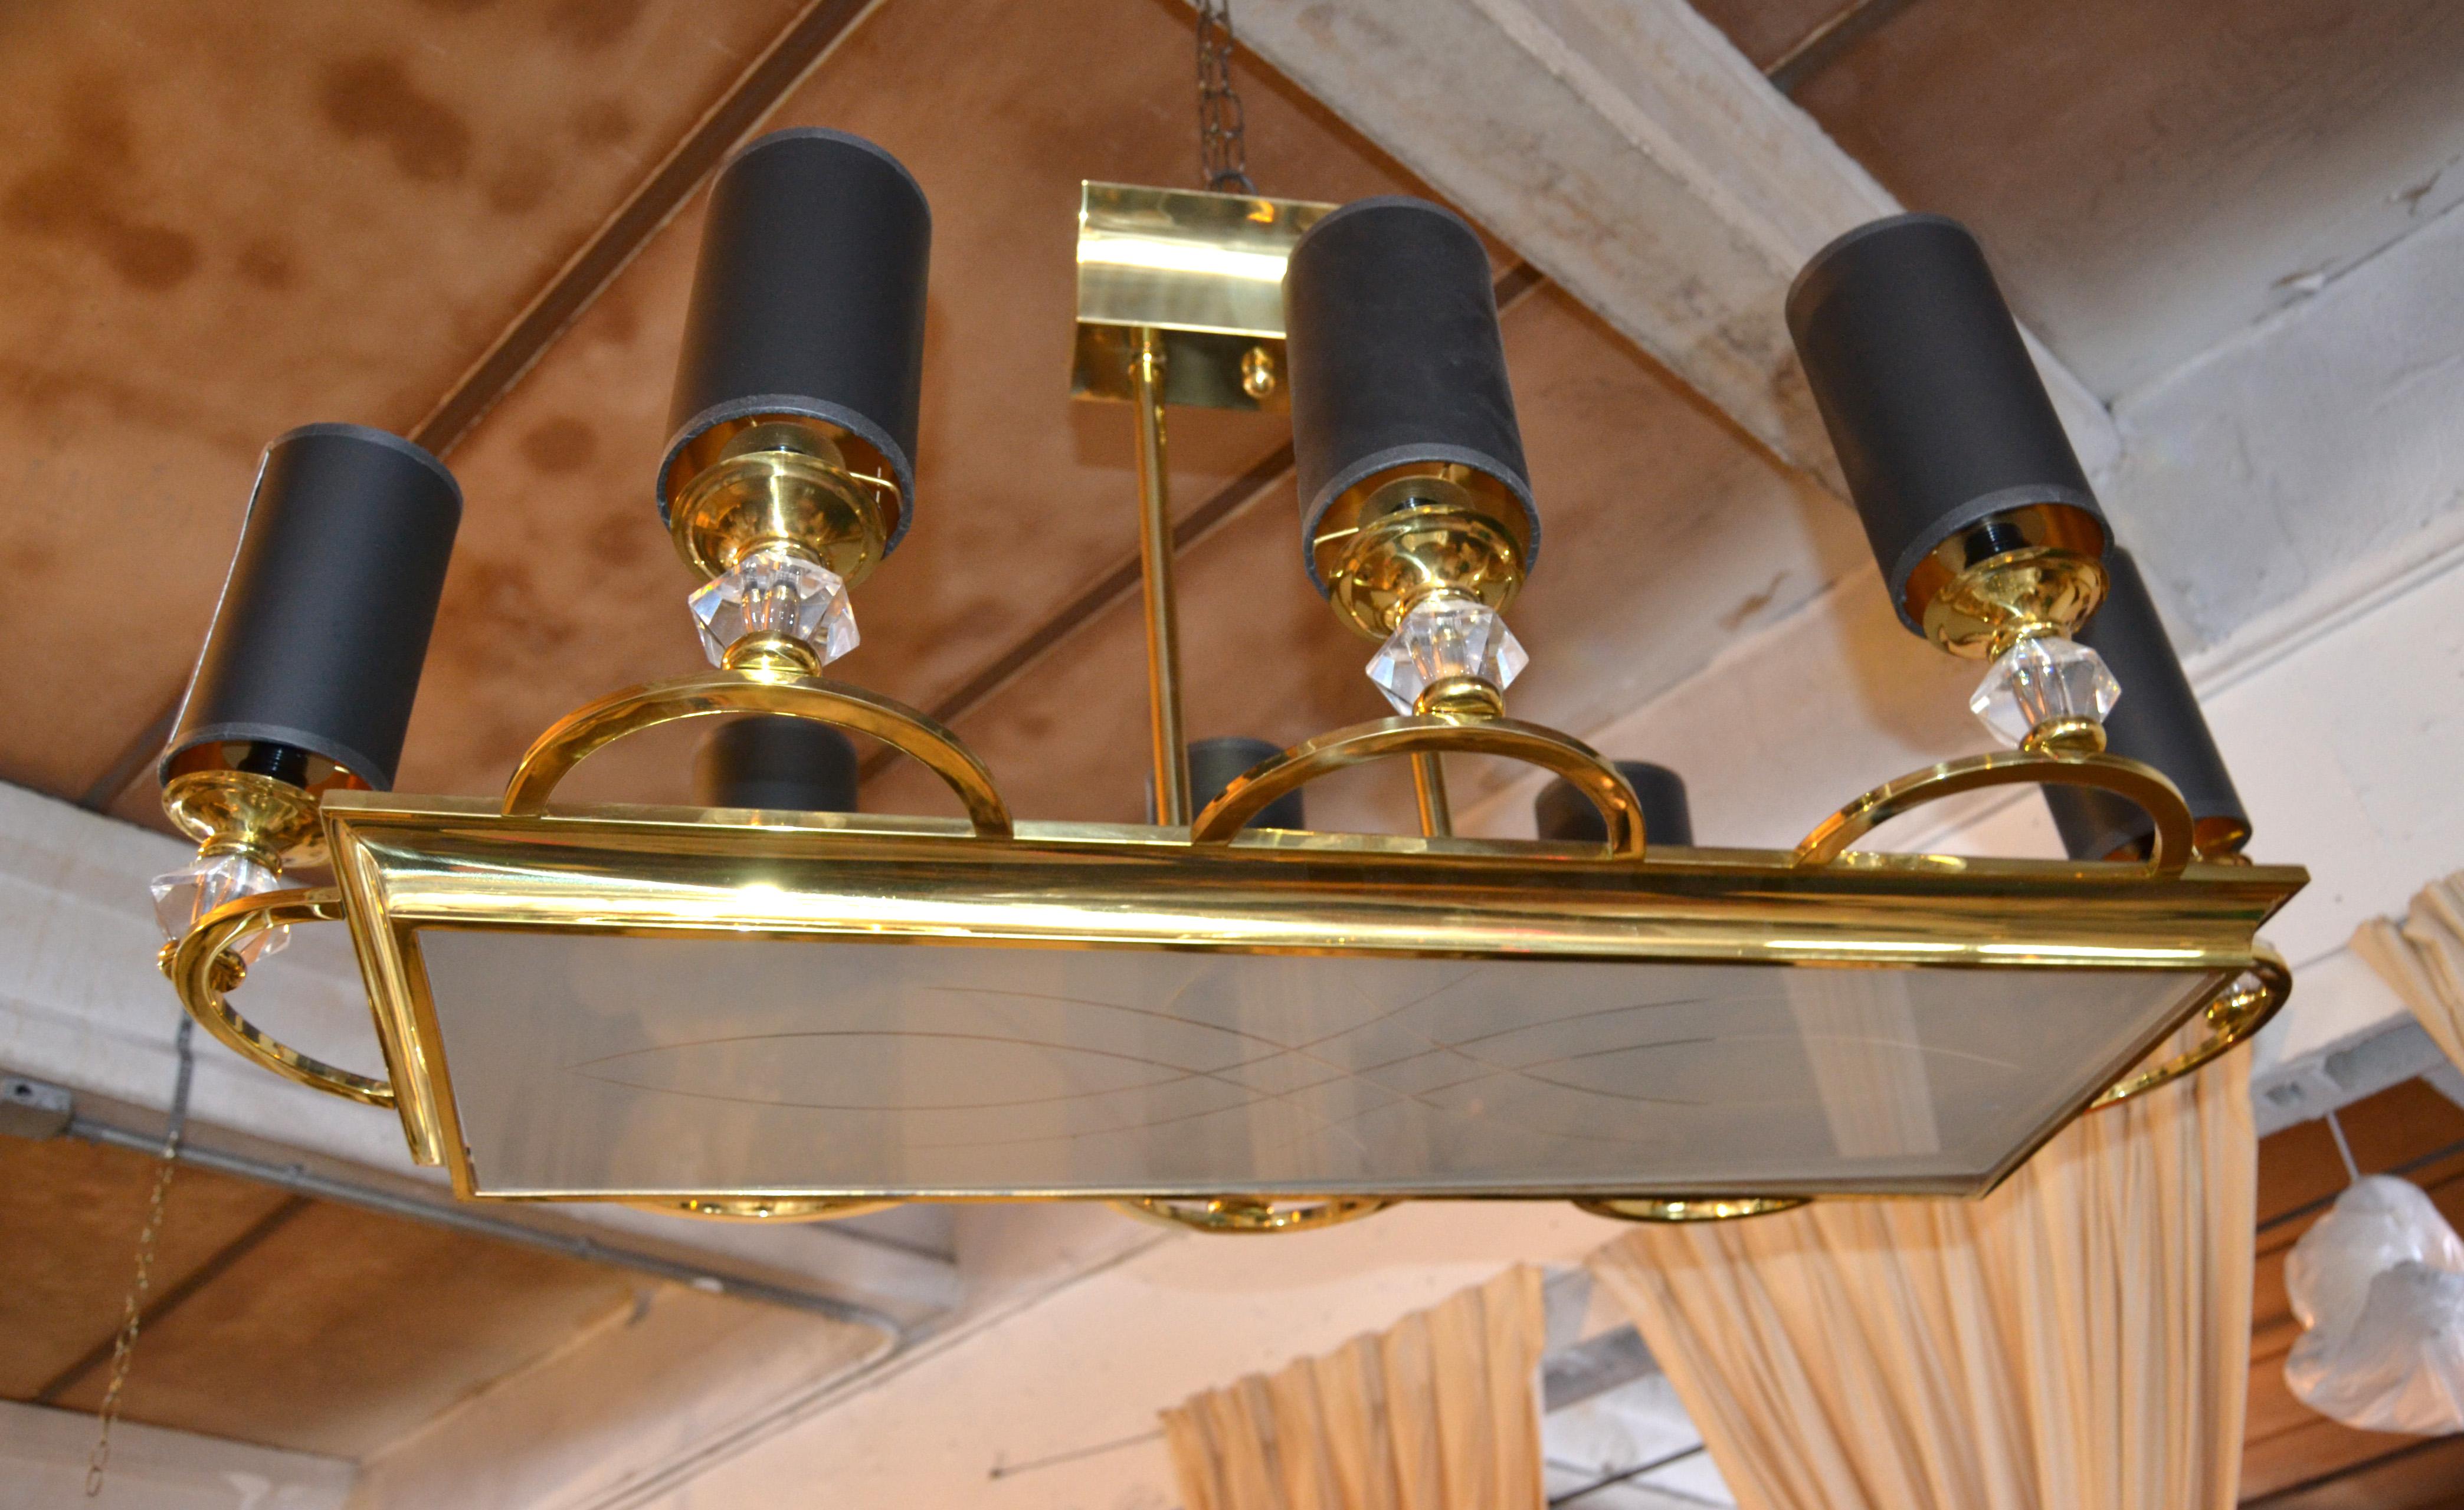 Monumental 8 Light Maison Jansen chandelier in Brass with custom made Black & Gold Cylinder Paper Shades.
Features a heavy Brass Frame with etched and frosted rectangle Glass.
Each Socket has Brass cups and a faceted Glass bobeche all handmade in